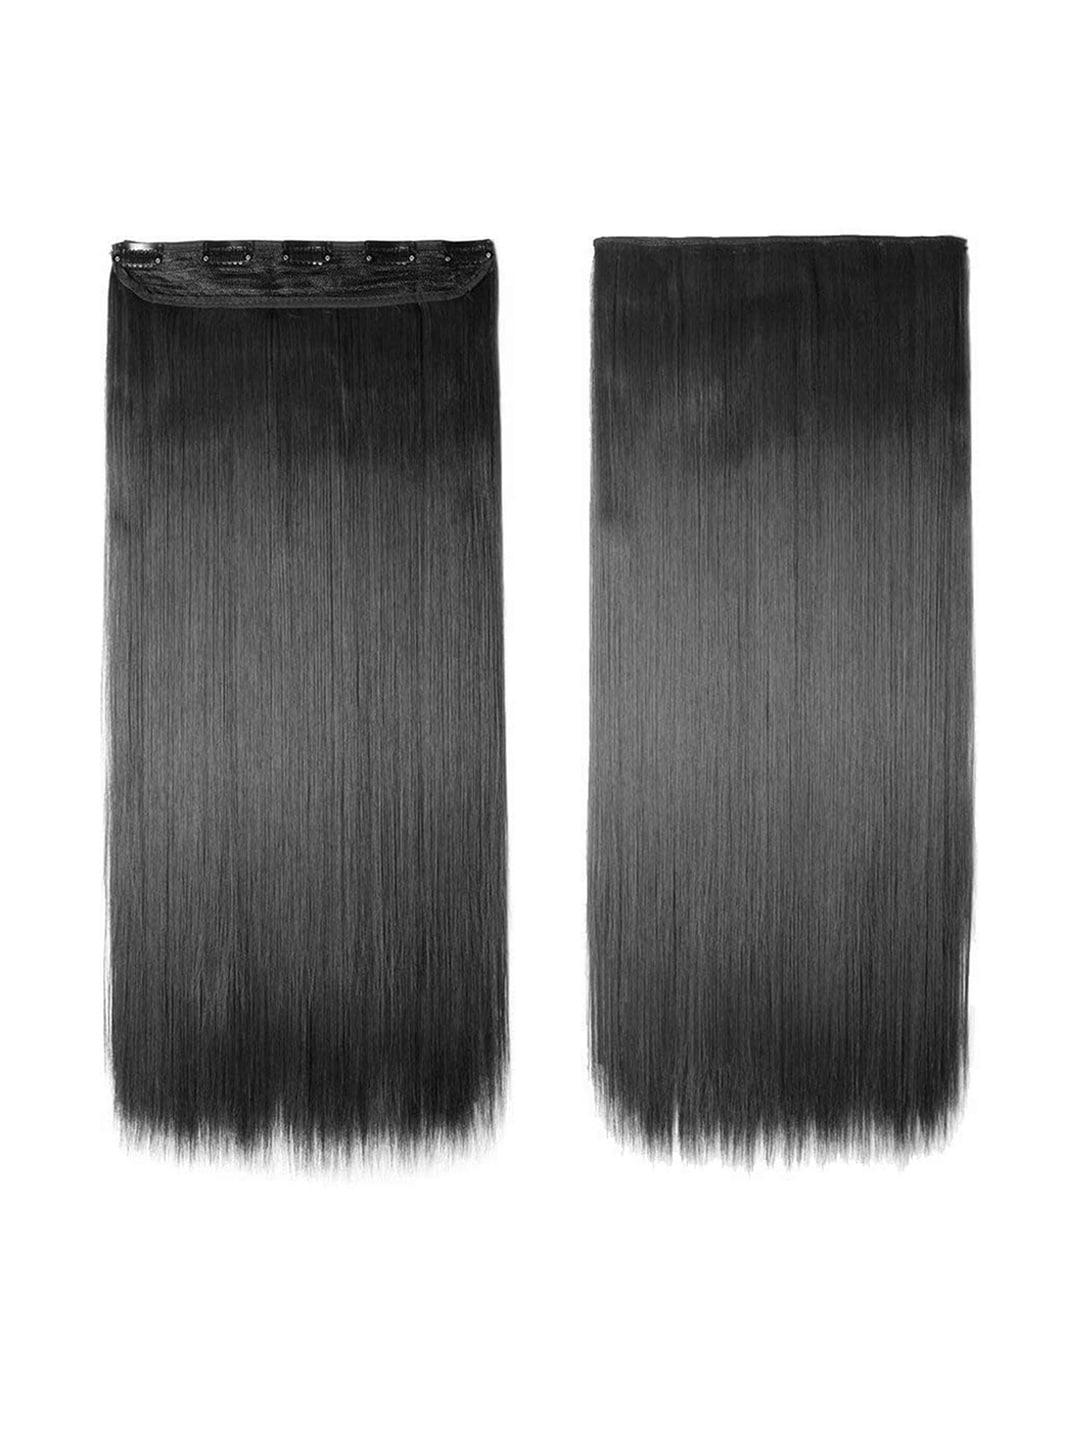 CHANDERKASH 5 Clips Based 24 Inches Straight Synthetic & Nylon Hair Extensions - Black